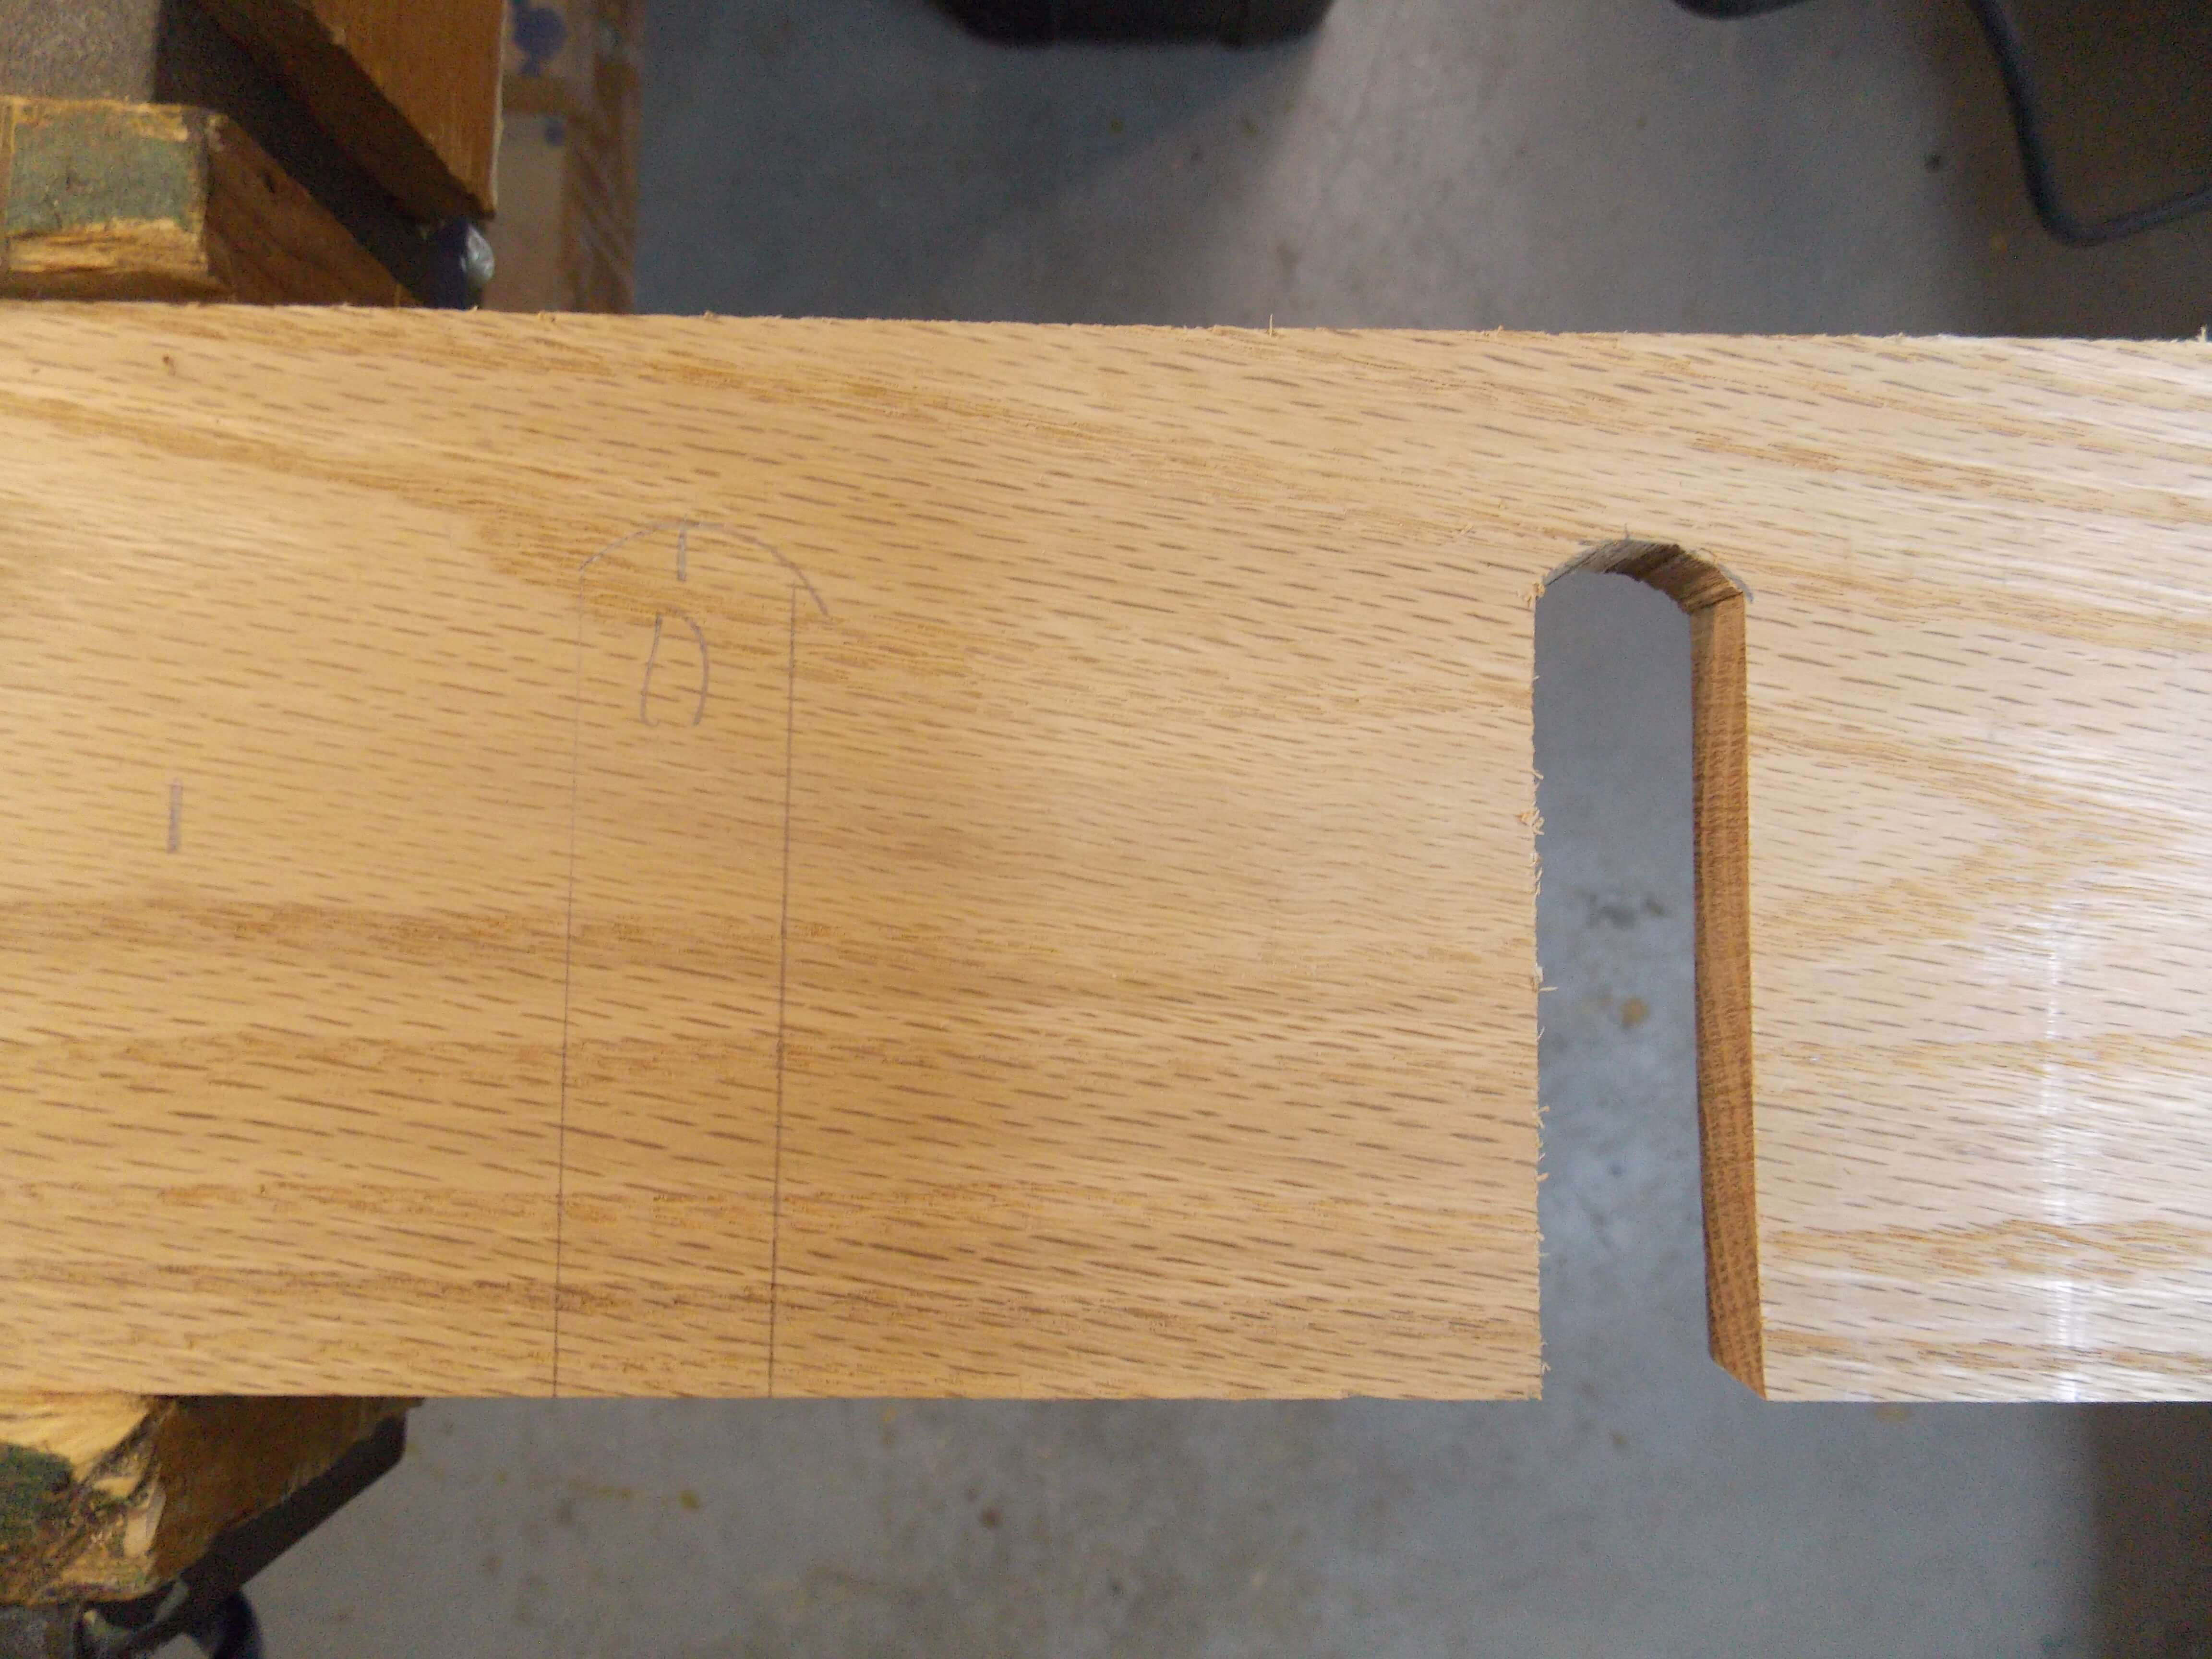 Create notches in each wood pieces to make the assembly easier